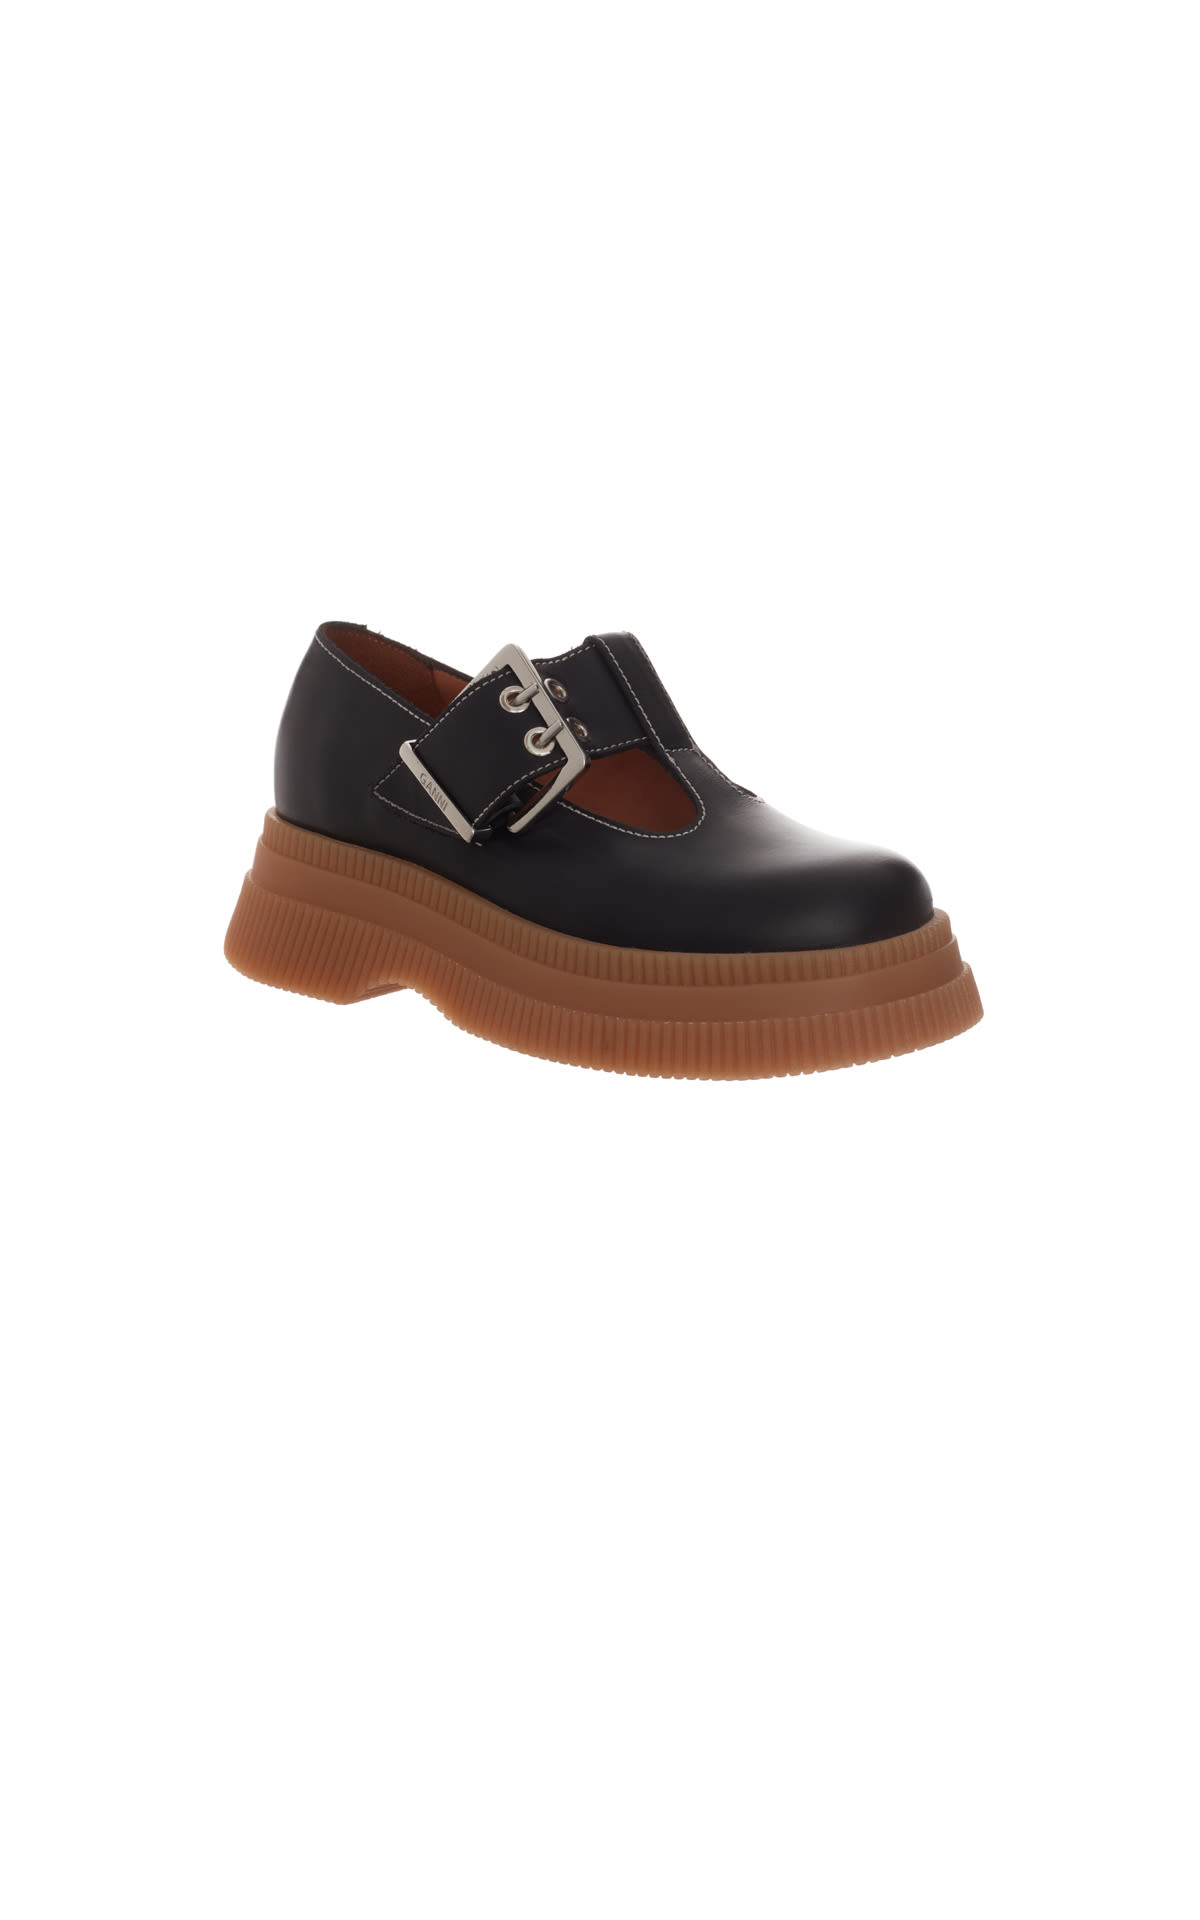 Ganni Buckles leather loafers from Bicester Village